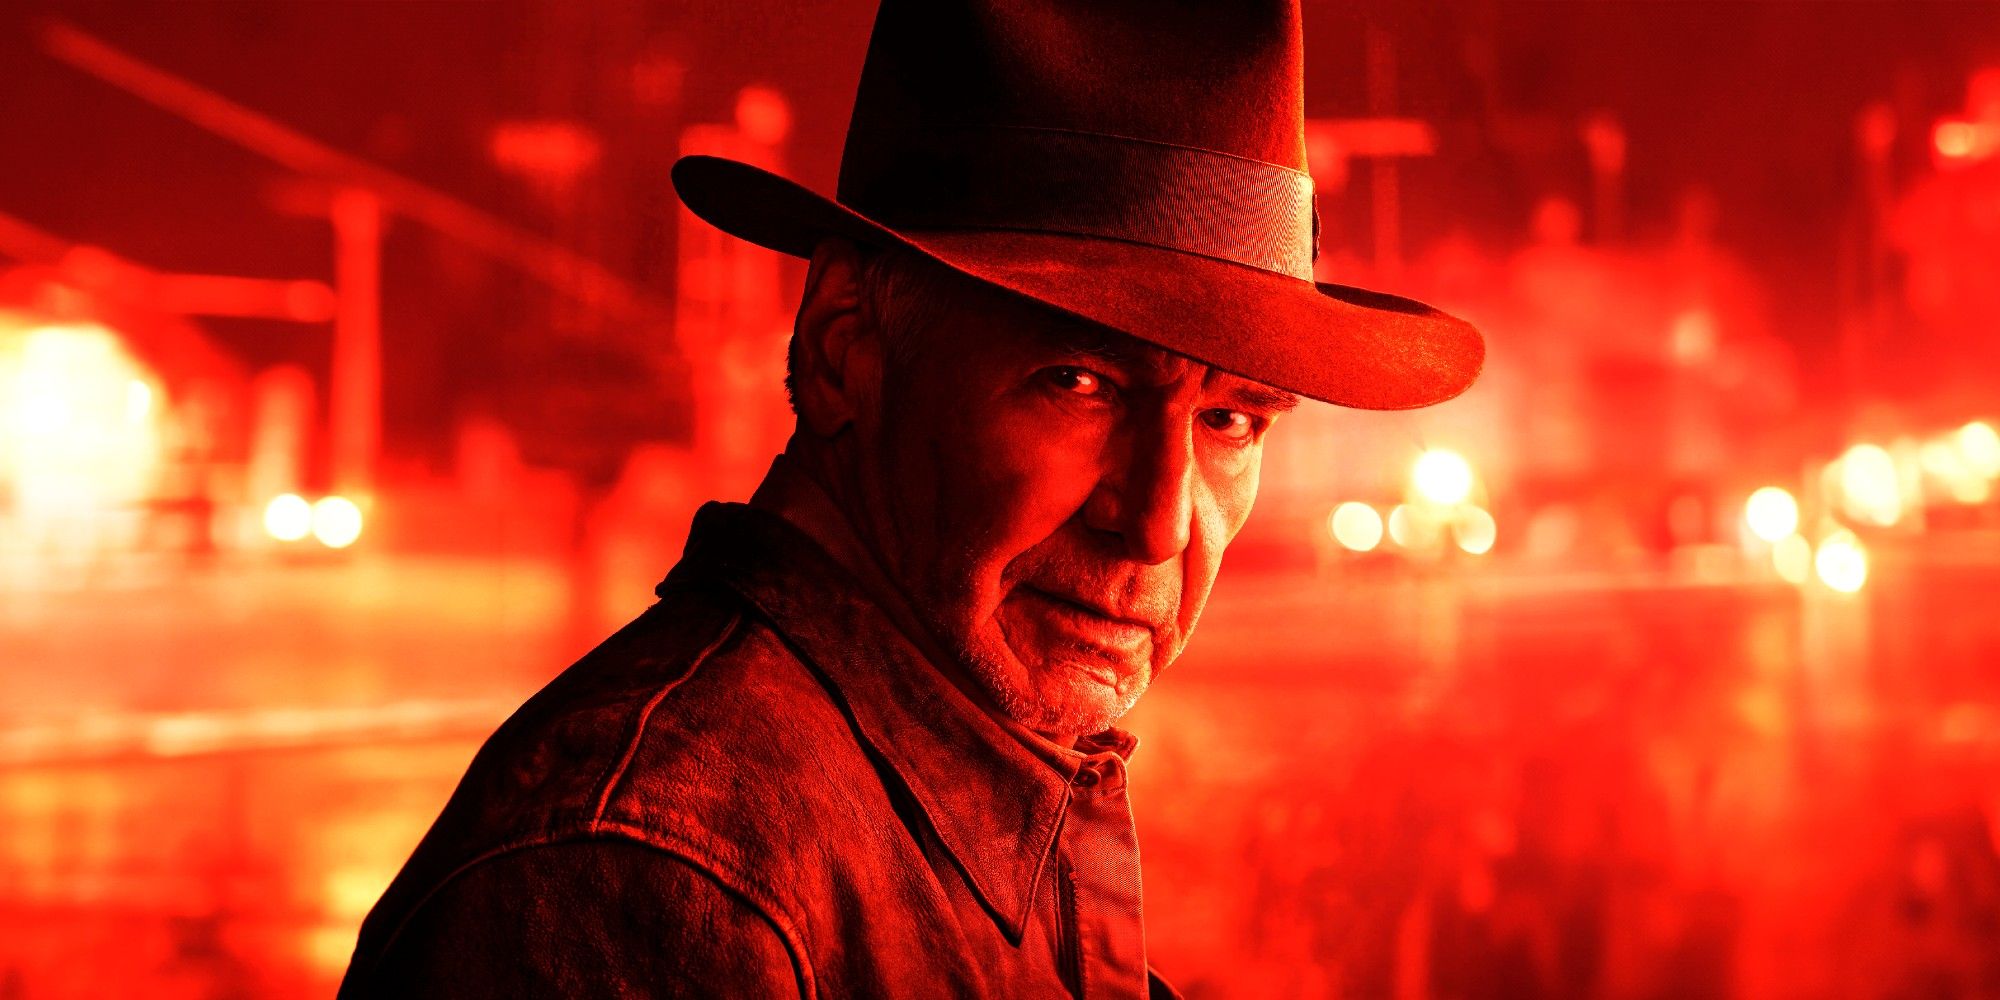 Indiana Jones 5 Takes Fans on an Unforgettable Adventure: Director ...